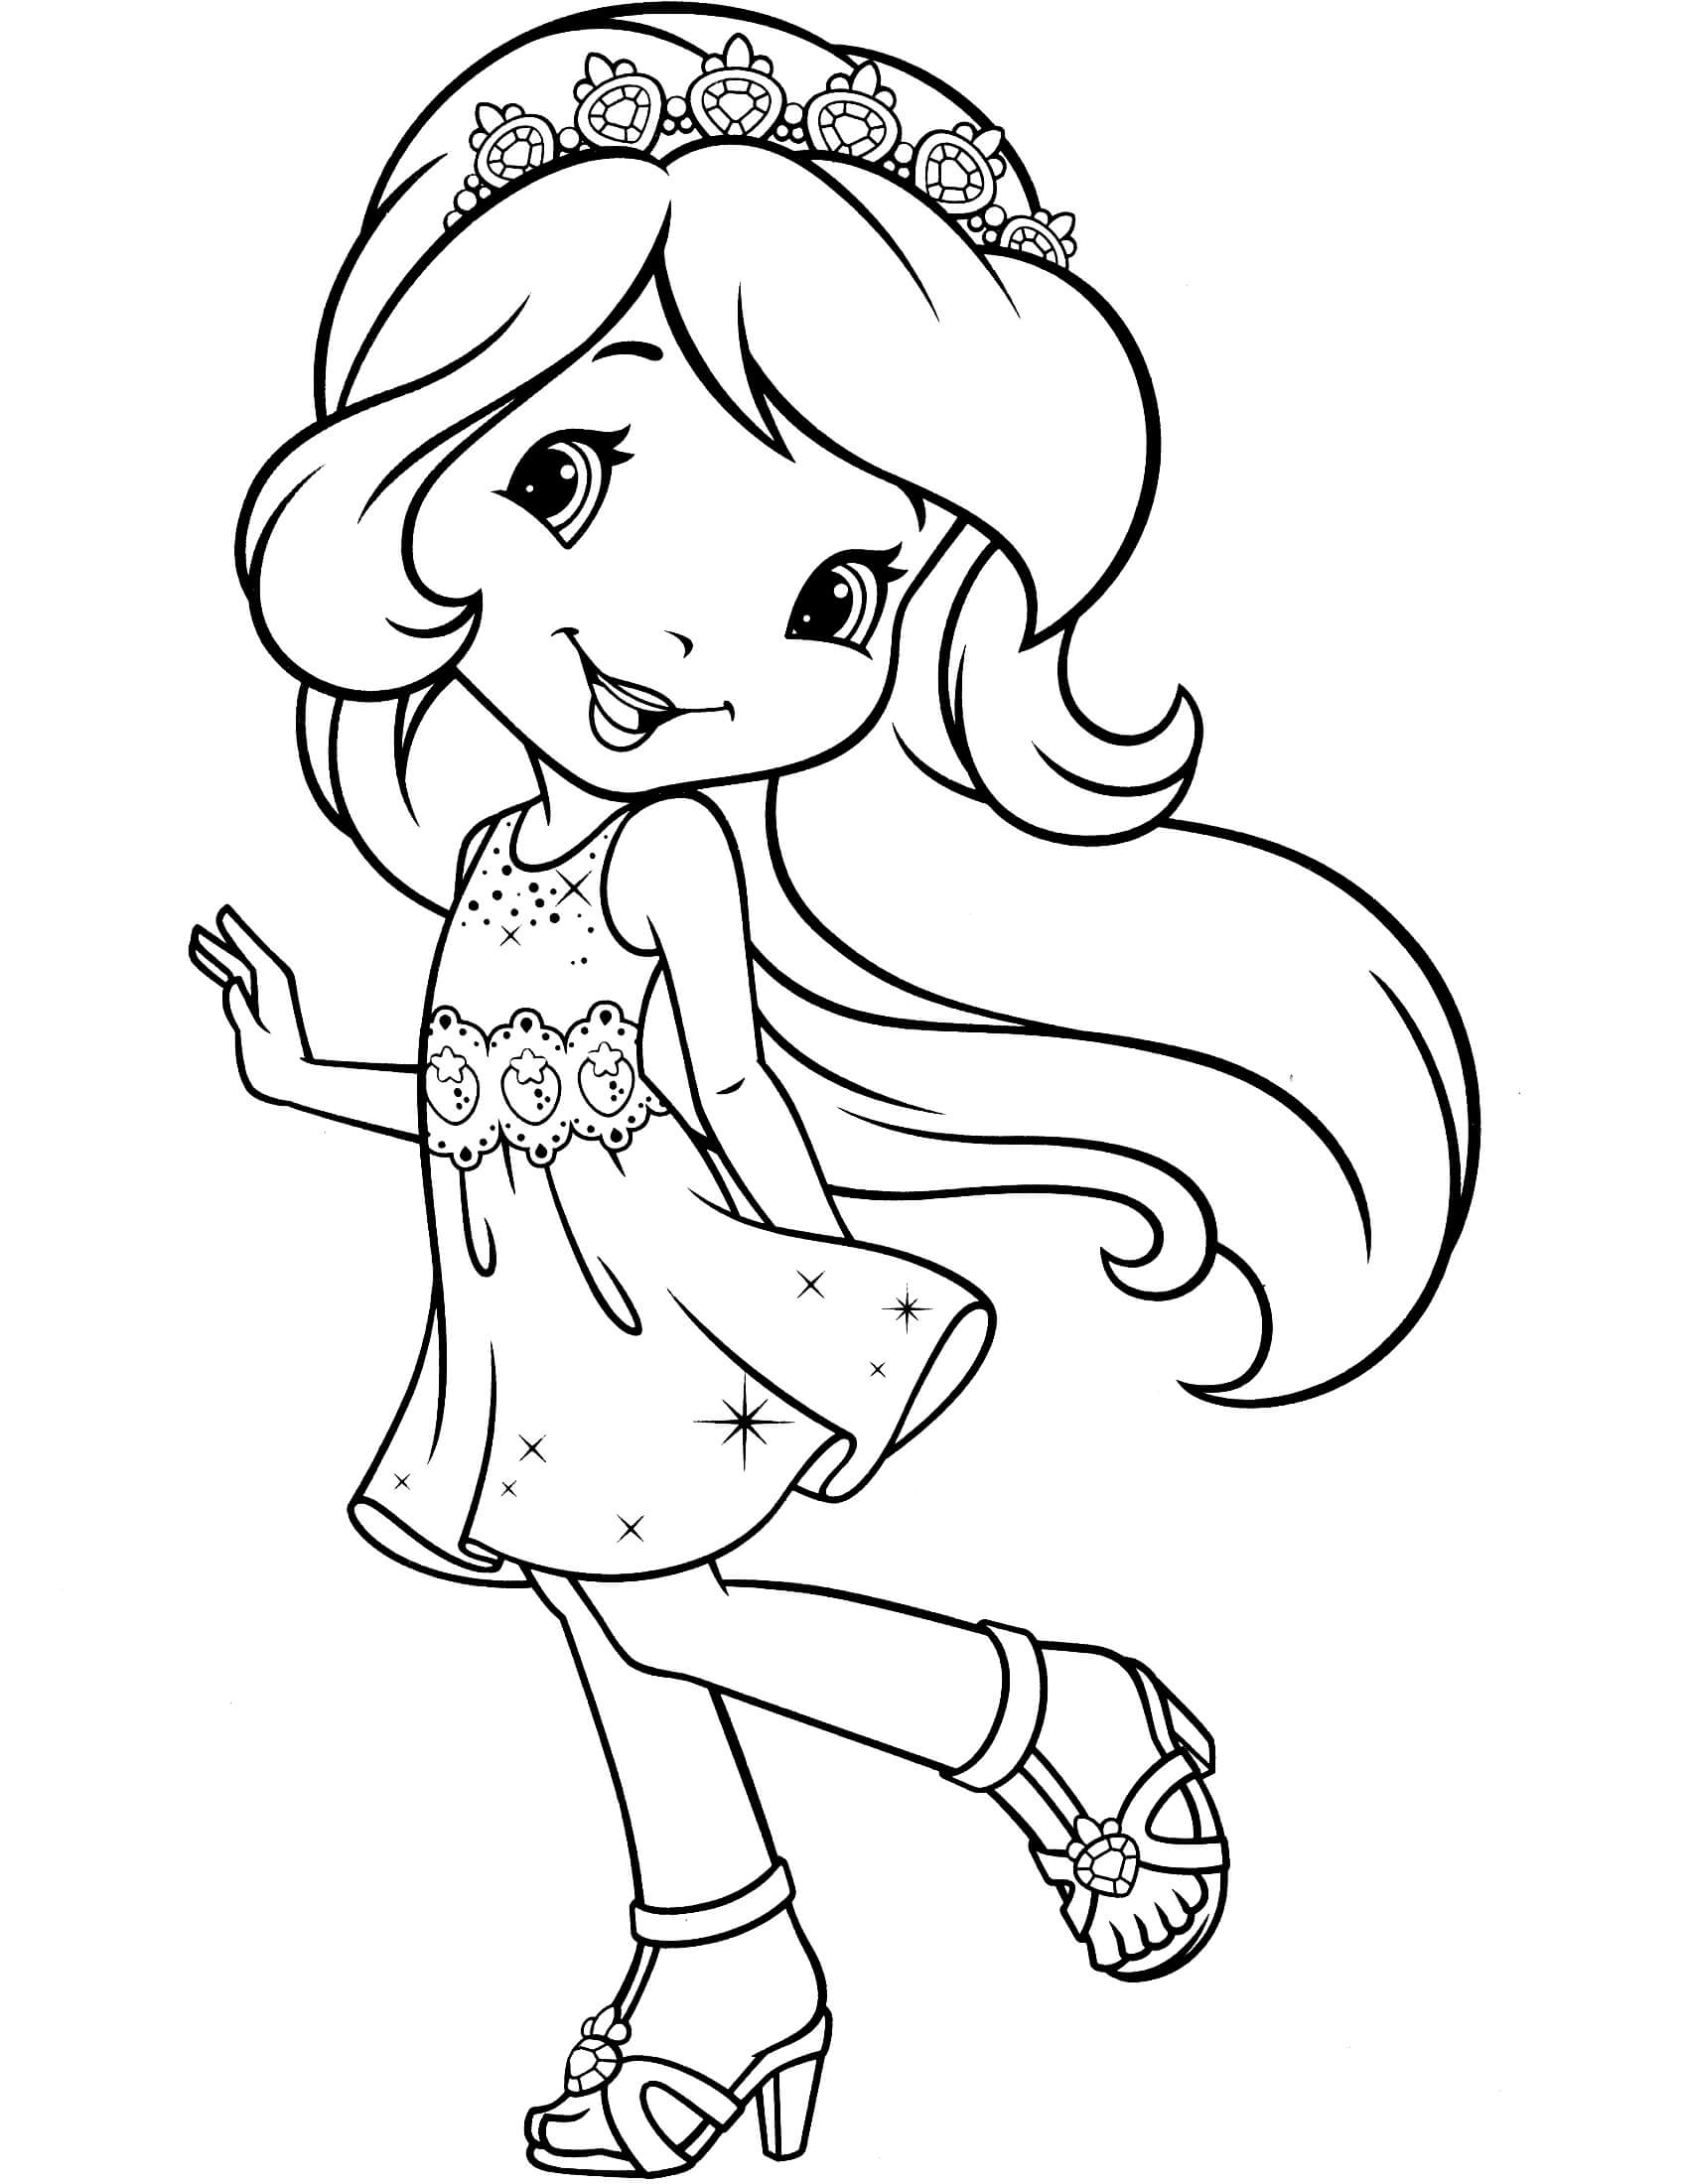 strawberry shortcake colouring pages to print coloring pages for girls strawberry shortcake coloring pages shortcake print colouring pages strawberry to 